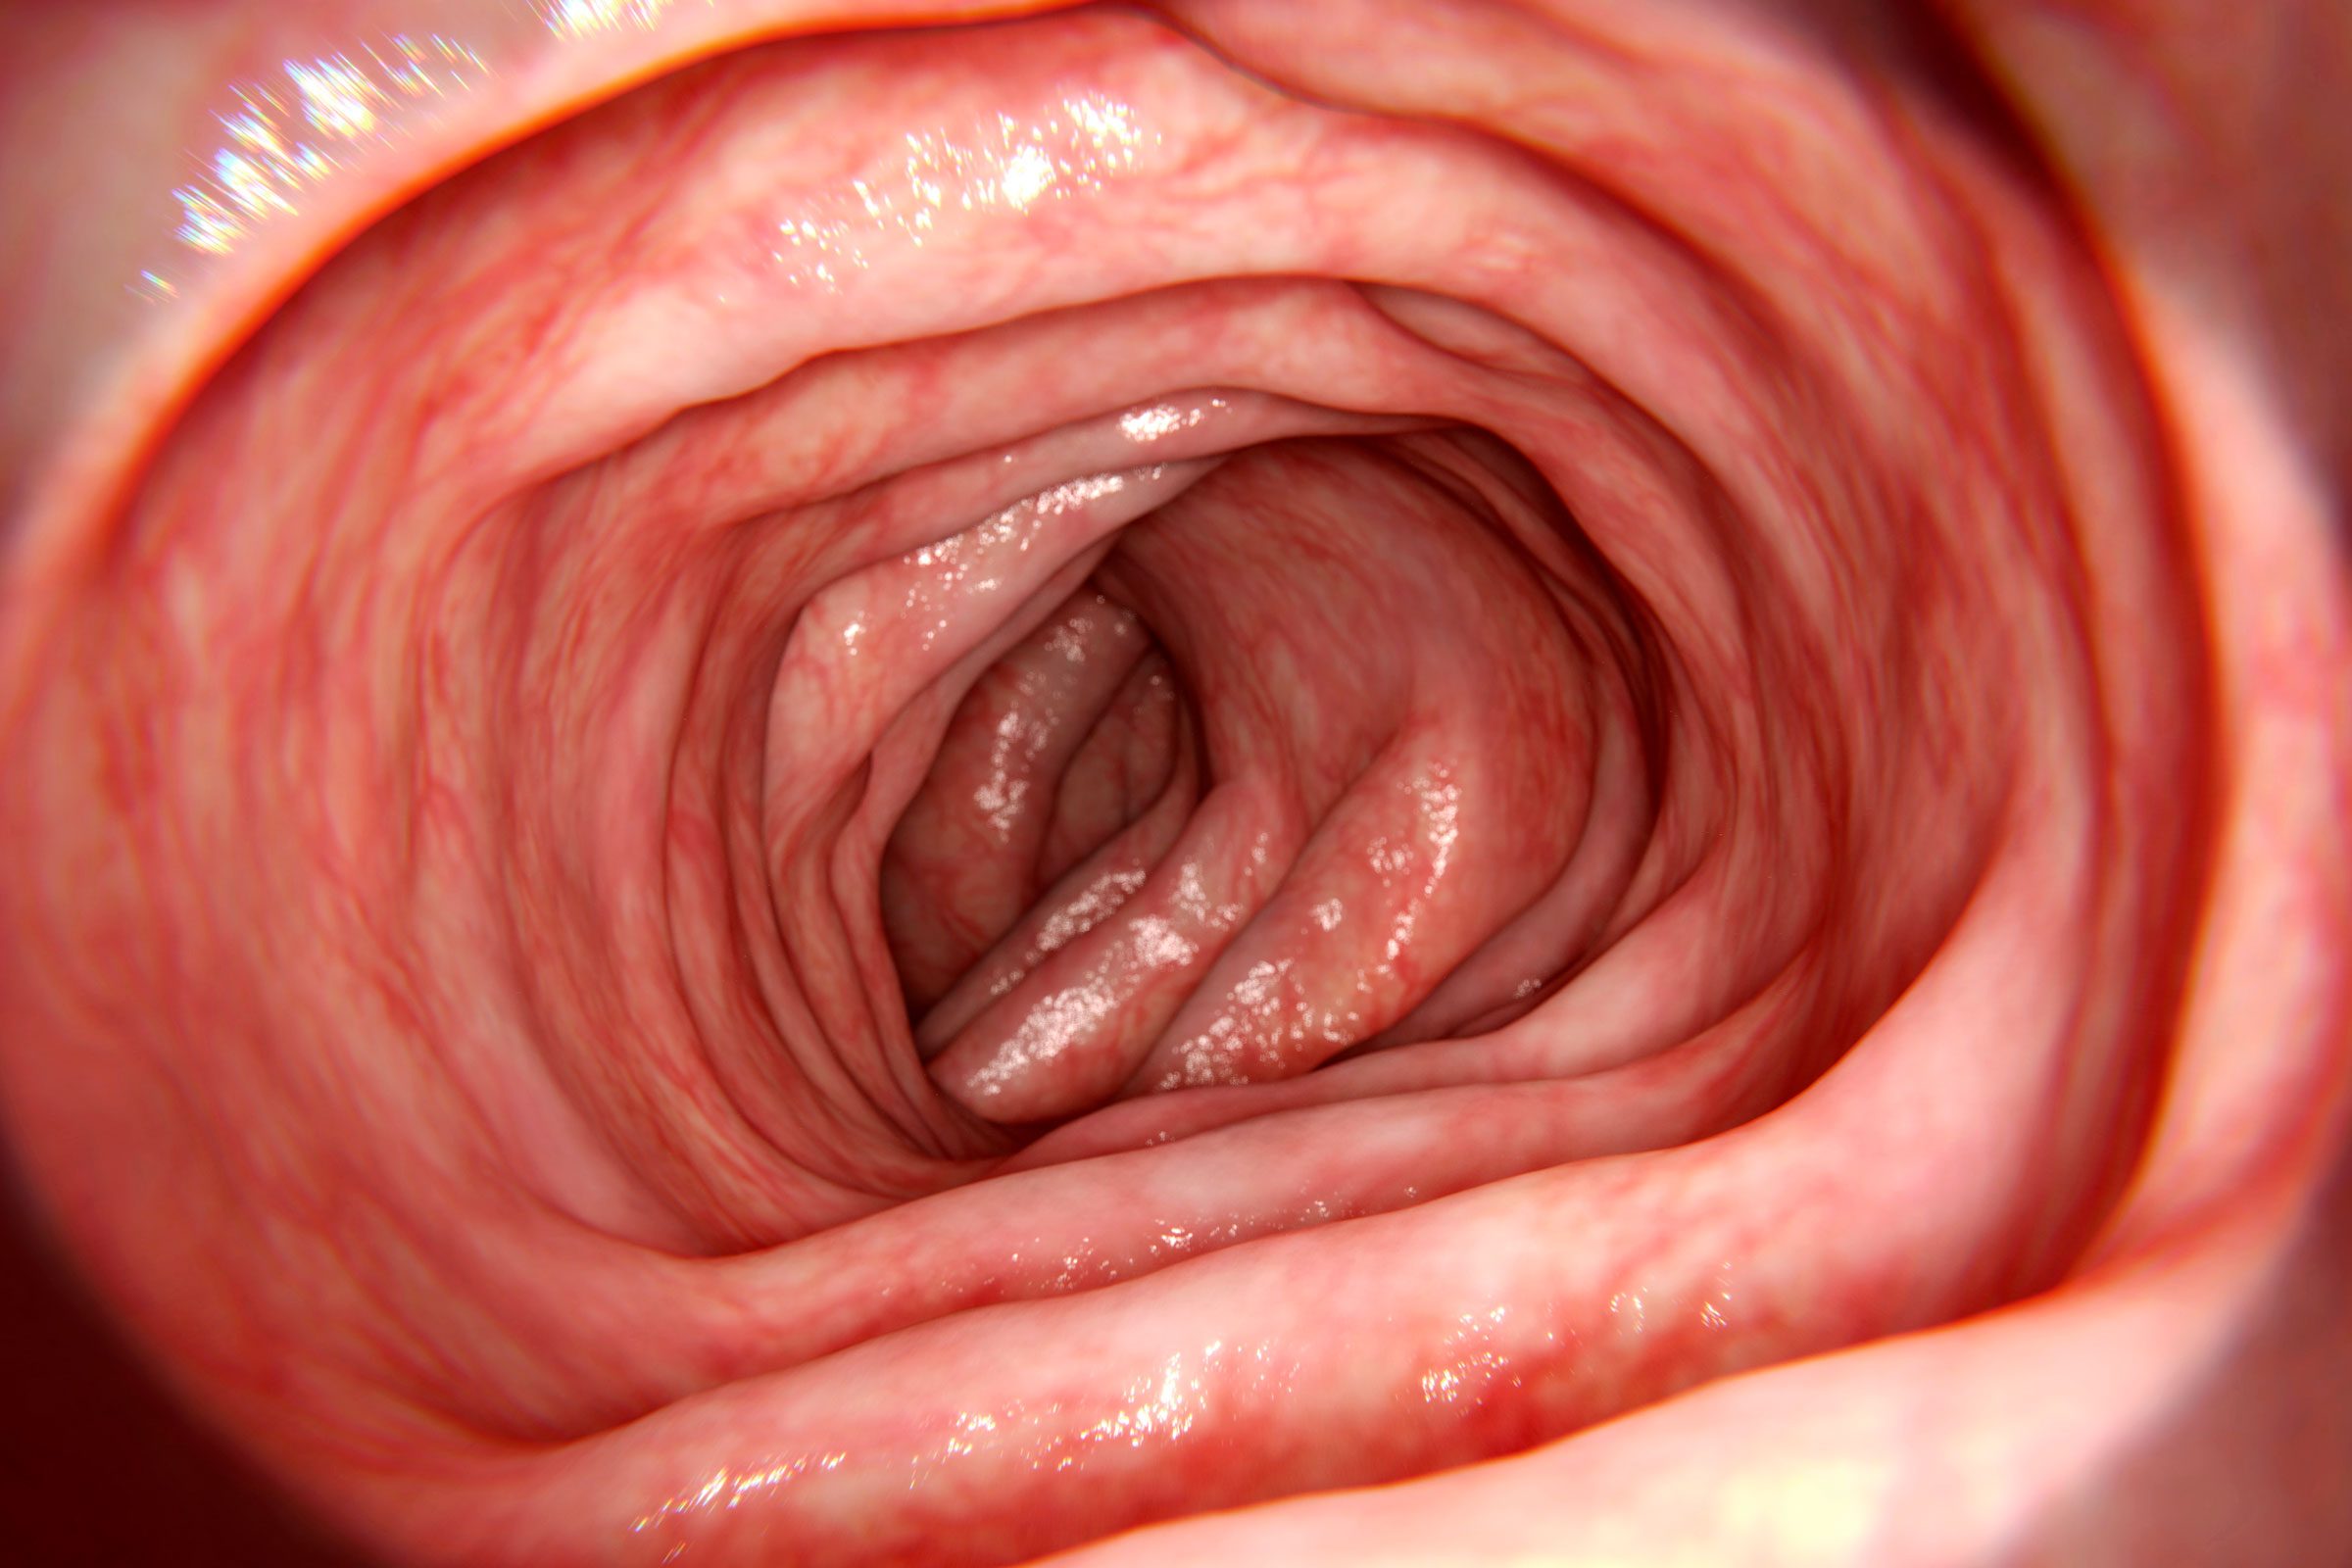 New Data: 80% of Americans Don't Know This Colon Cancer Risk